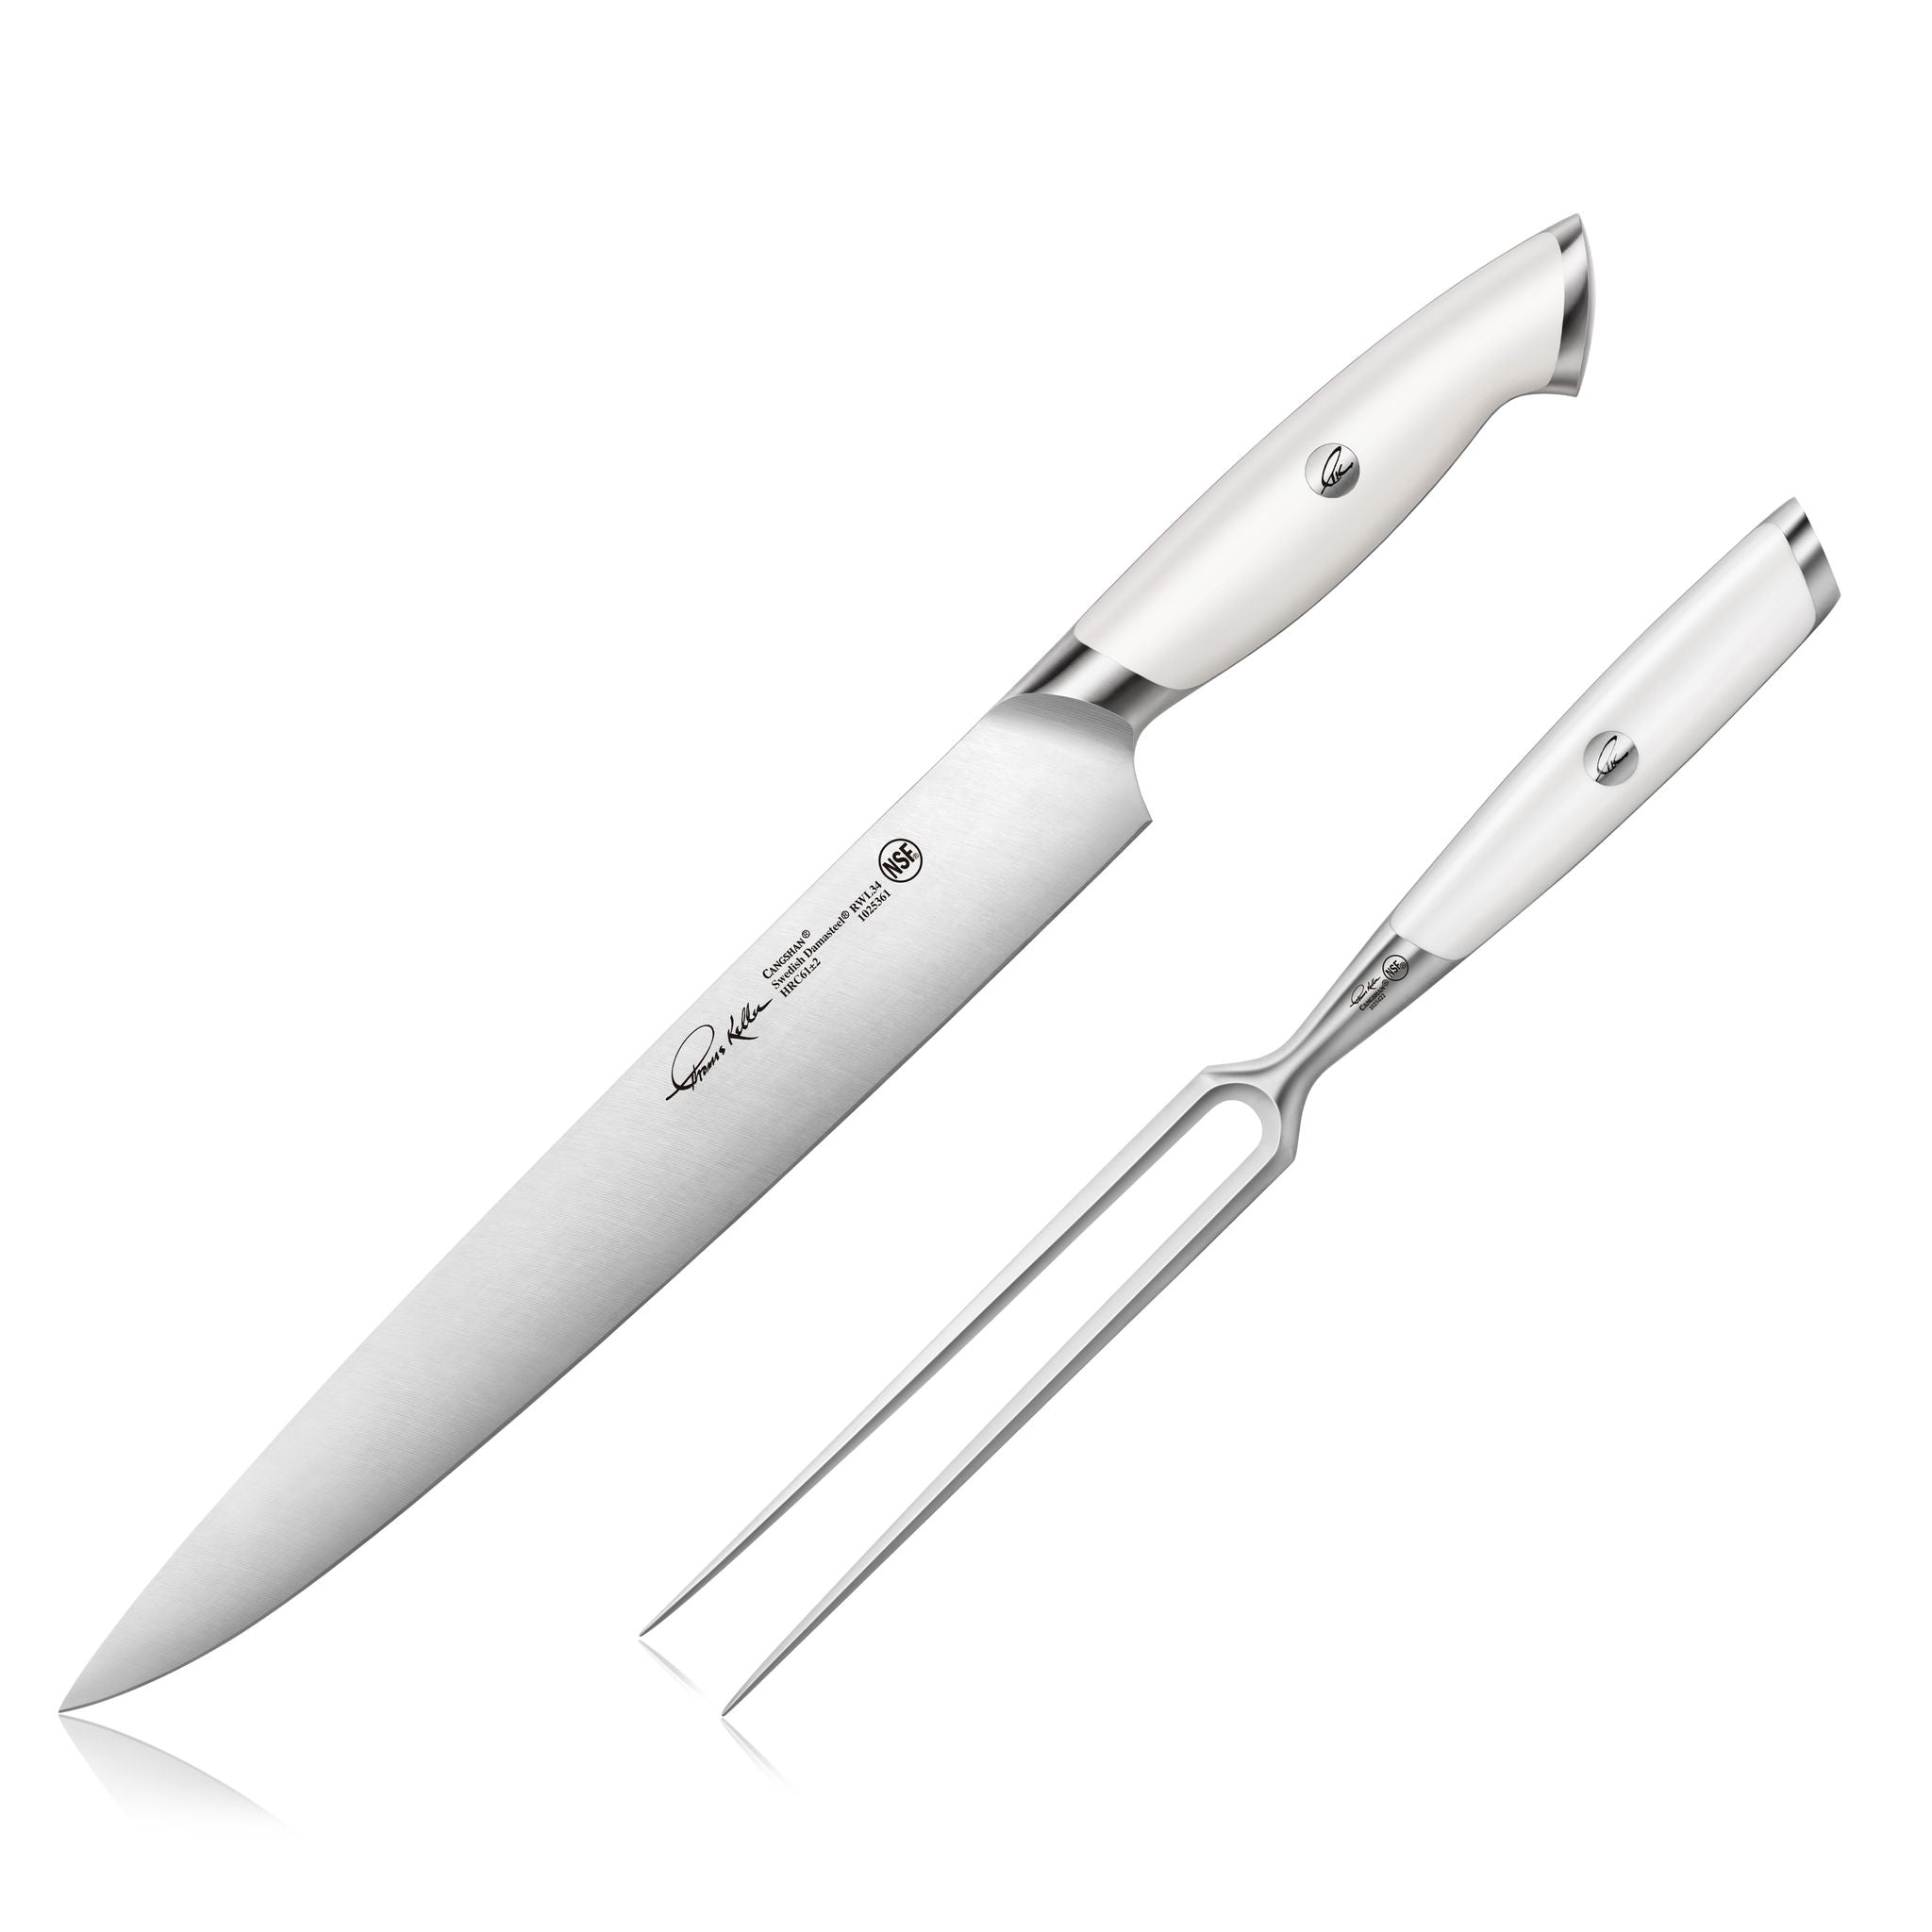 Classic Cuisine Electric Carving Knife Set w/ 2 Stainless Steel Blades -  9097720